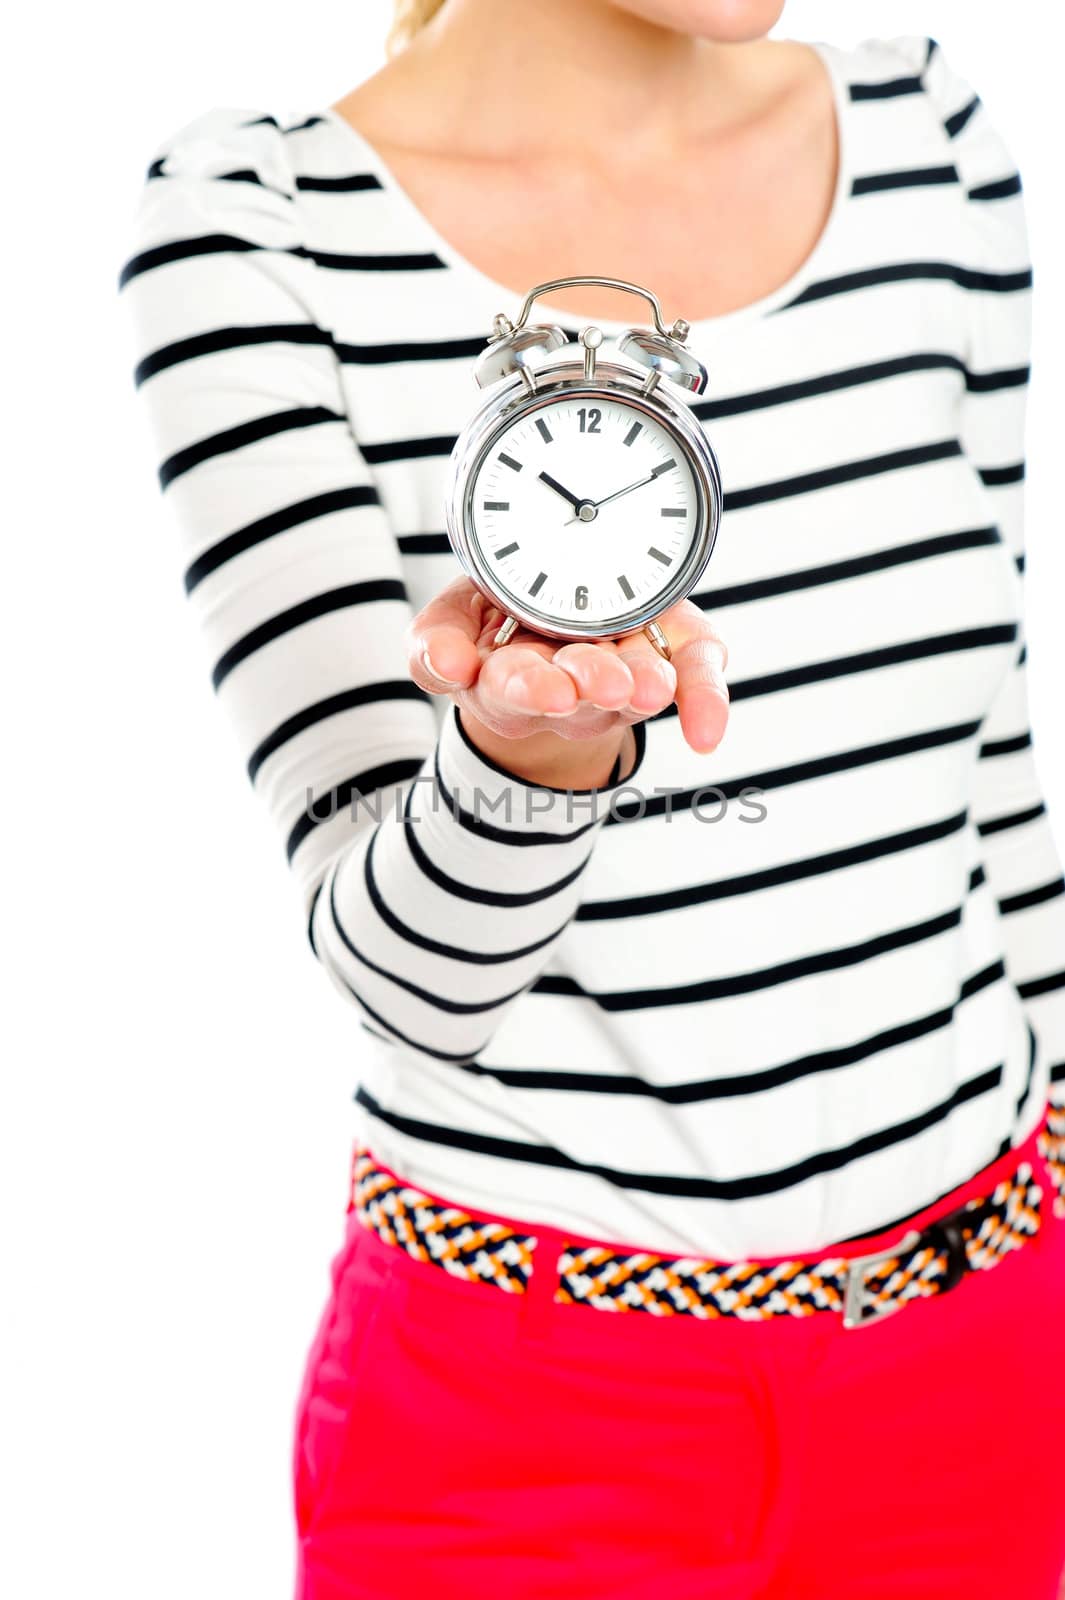 Cropped image of a woman holding alarm clock. Focus on clock